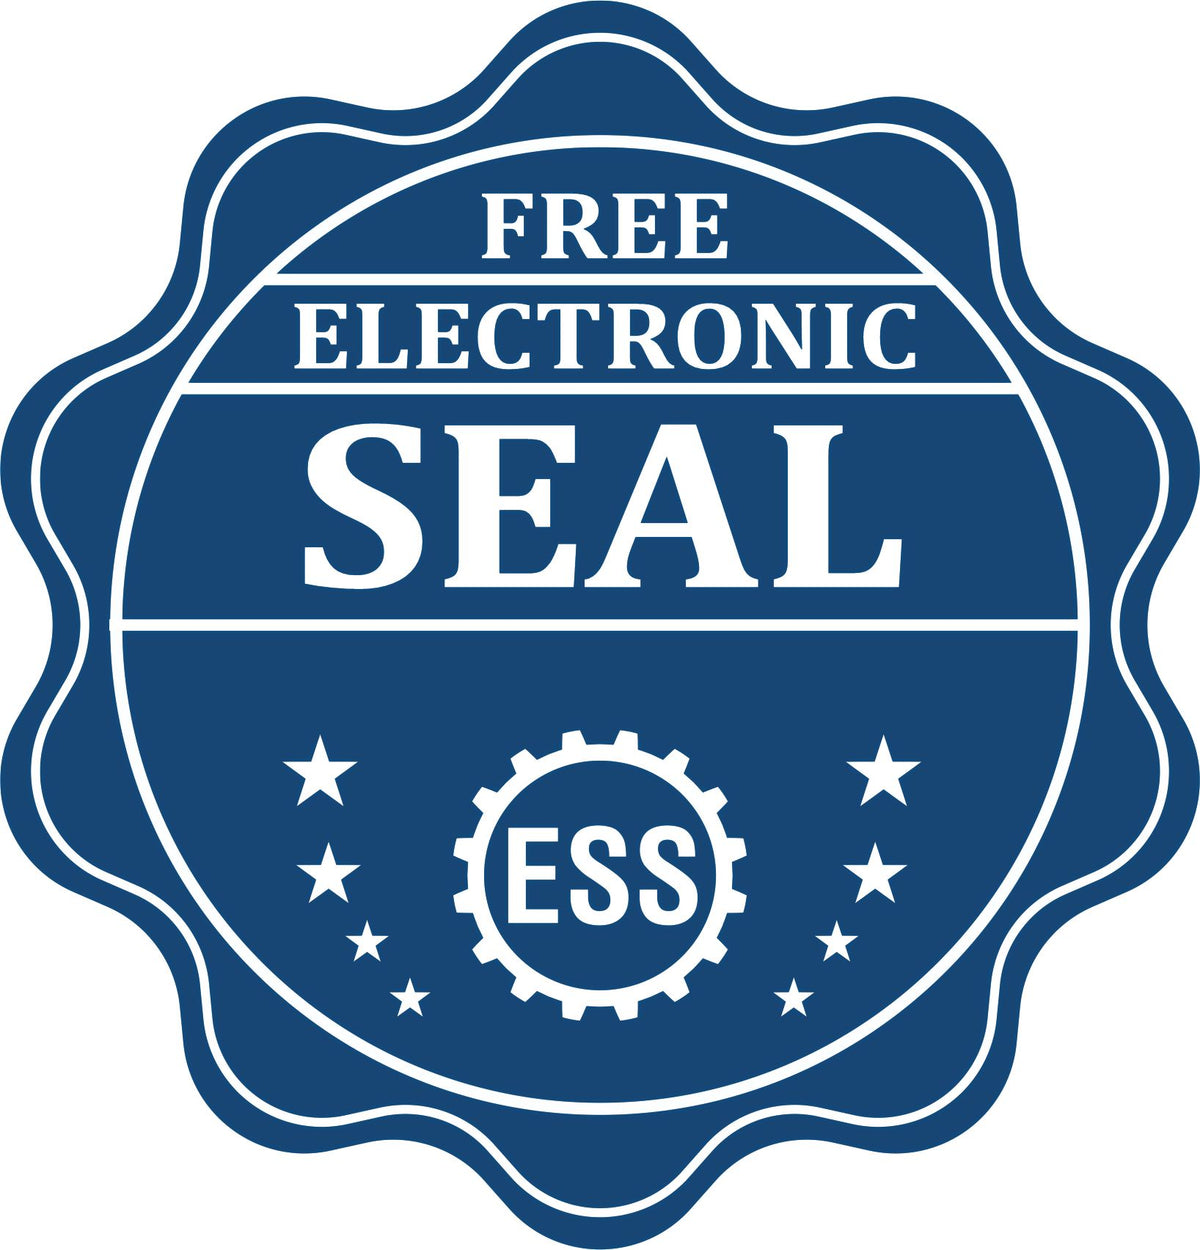 A badge showing a free electronic seal for the State of Virginia Extended Long Reach Geologist Seal with stars and the ESS gear on the emblem.